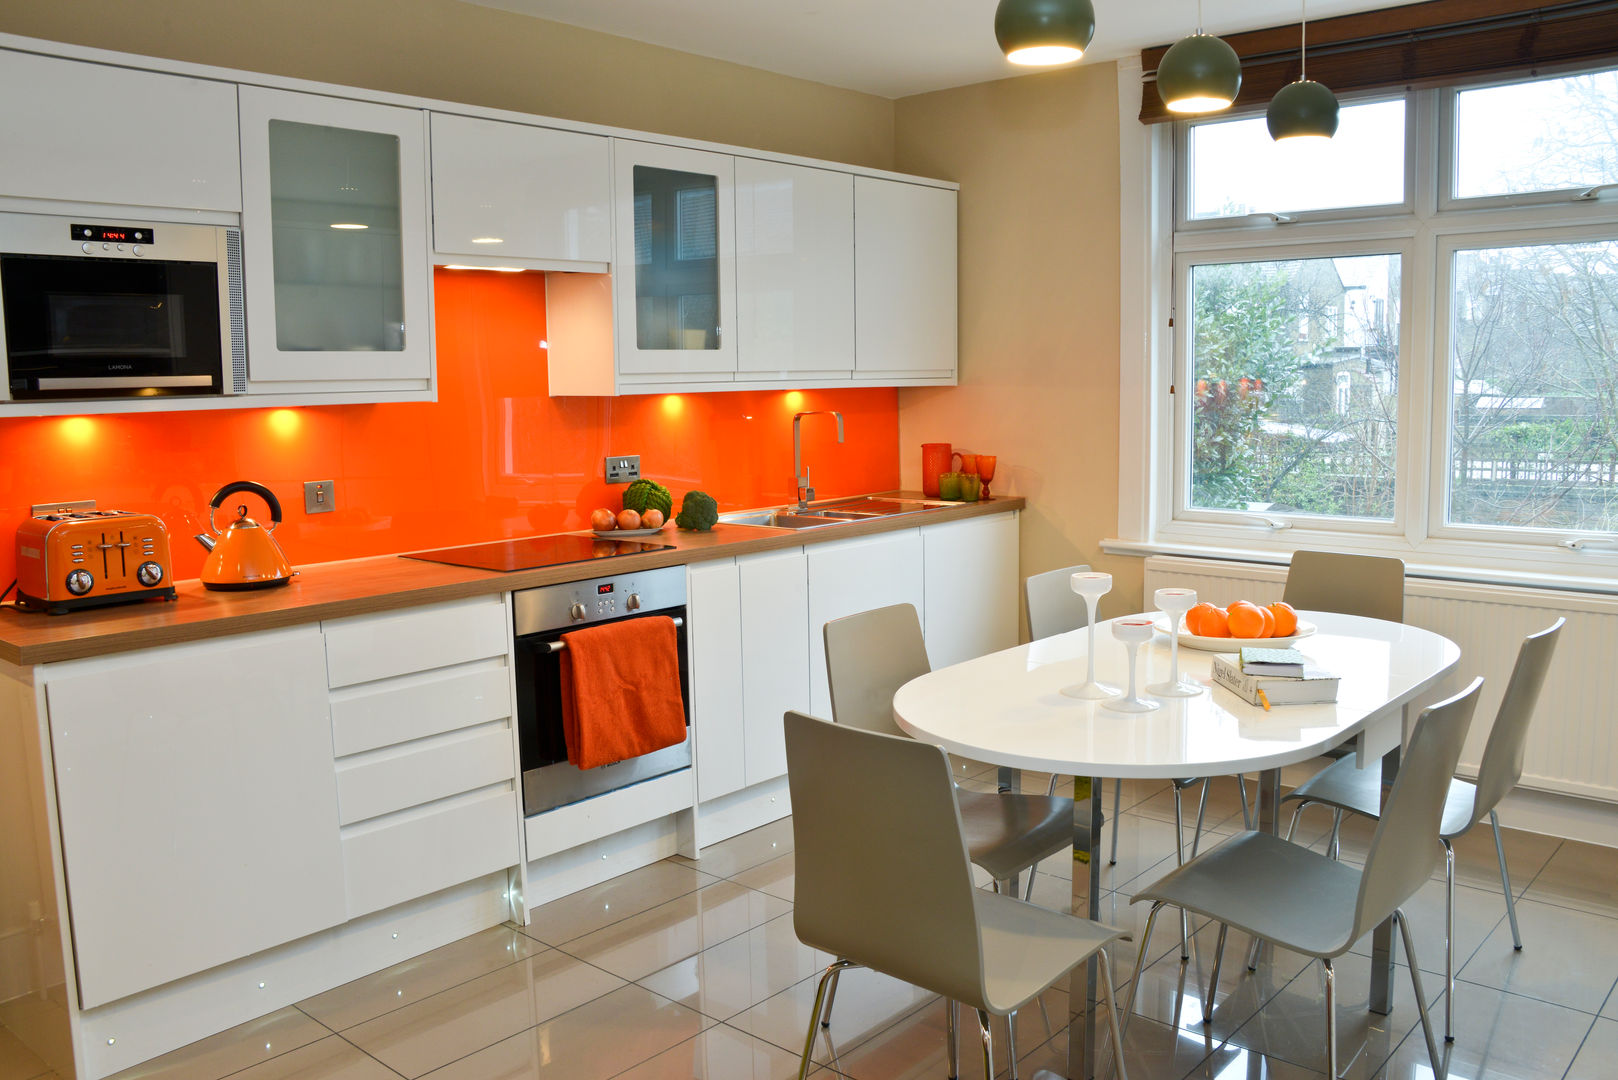 A Bright and Breezy Kitchen, Cathy Phillips & Co Cathy Phillips & Co ห้องครัว